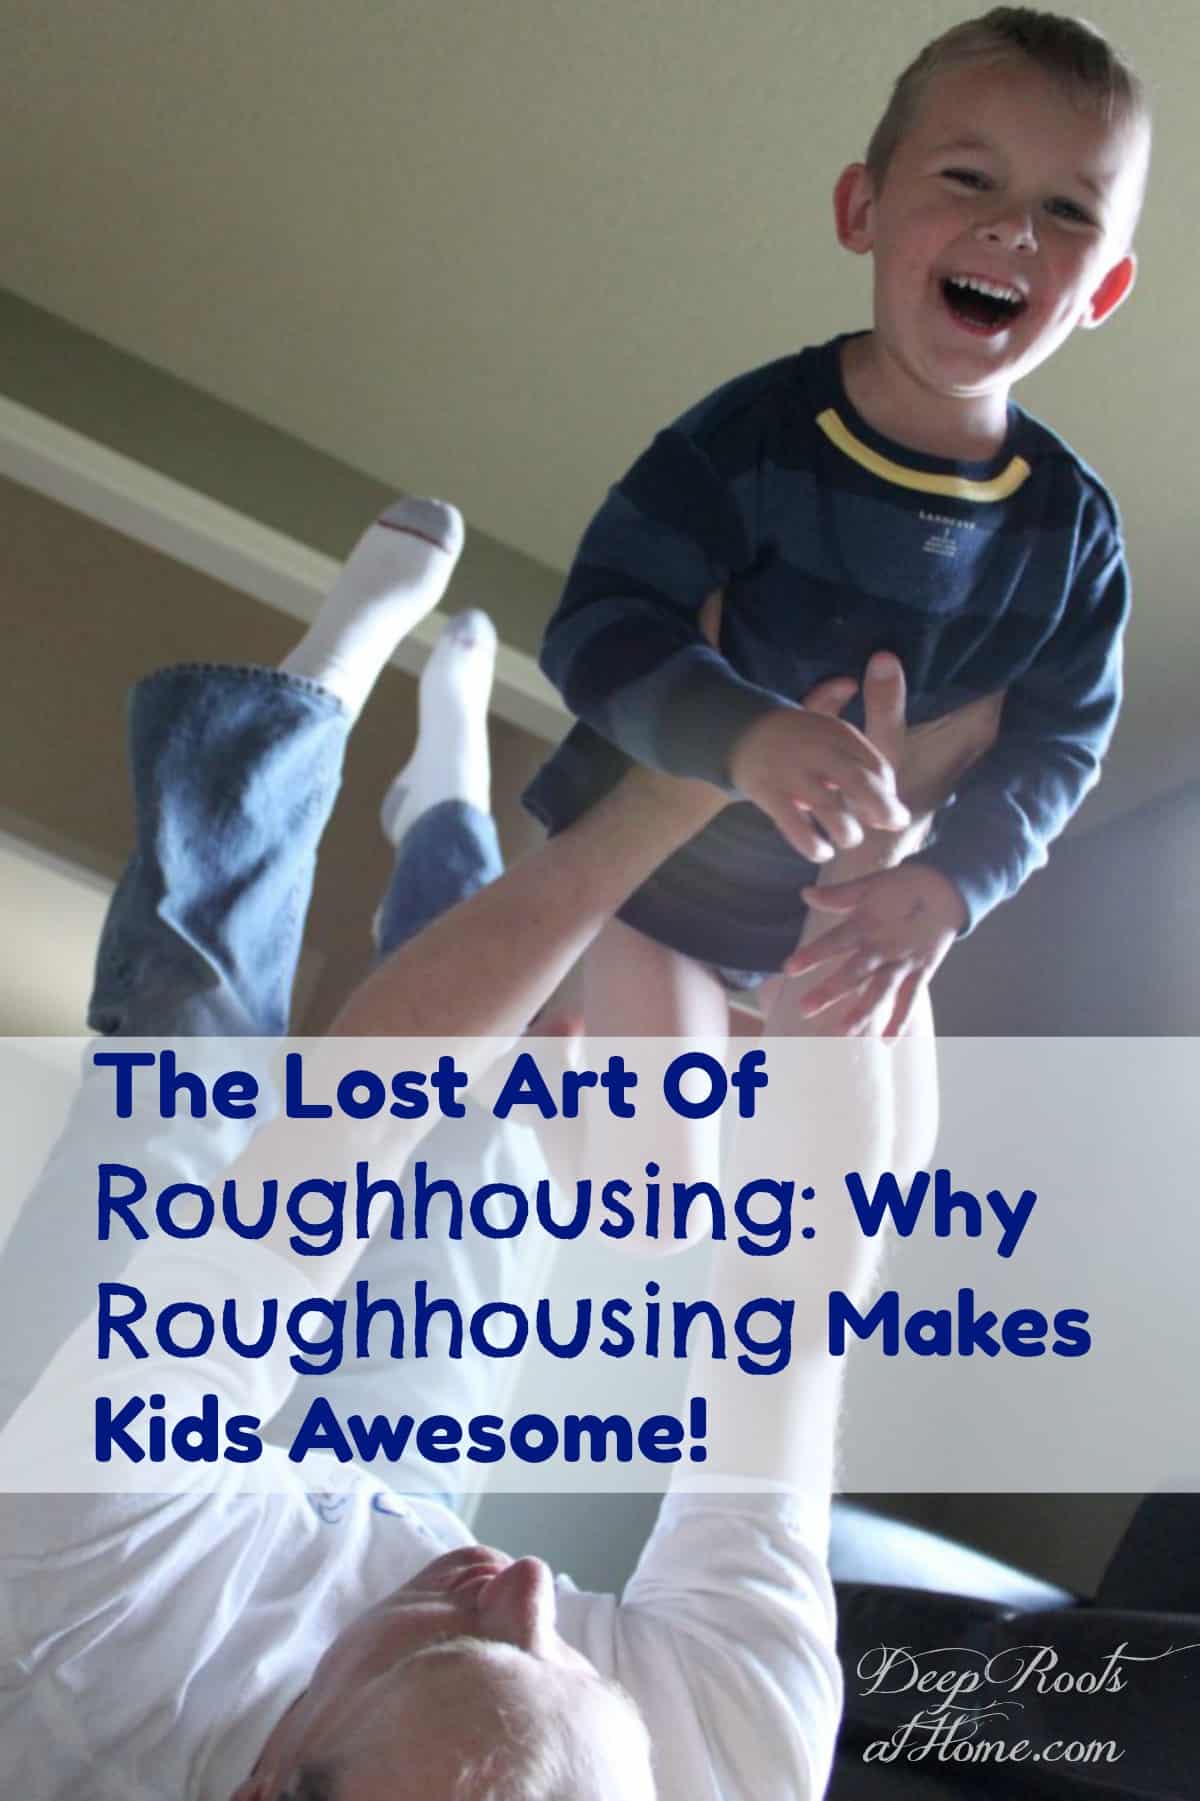 The Lost Art Of Roughhousing: Why Roughhousing Makes Kids Awesome. A dad wrestling on the bed in back-and forth, role reversal play with laughter and fun!